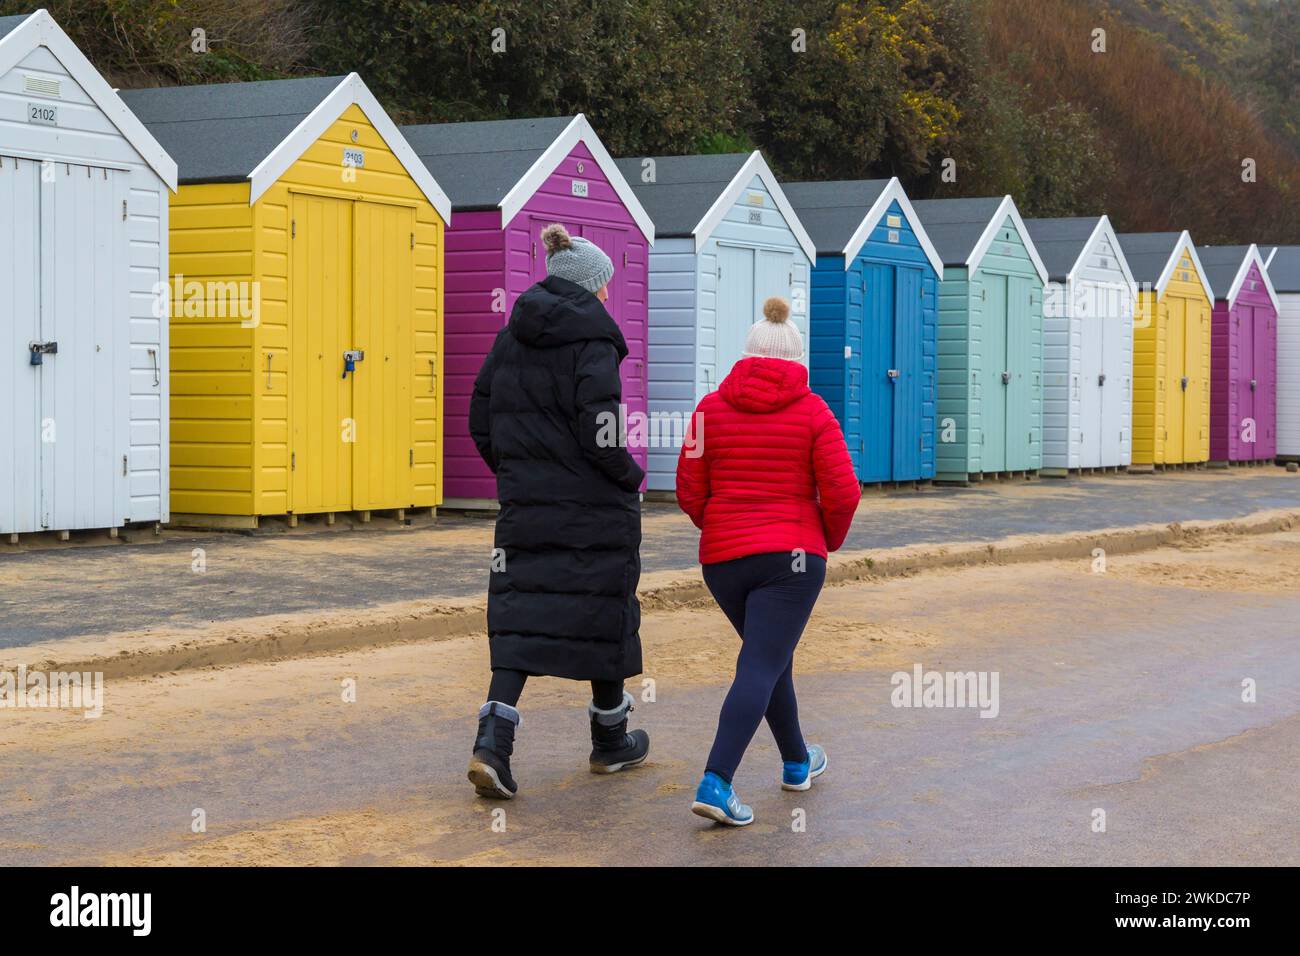 Bournemouth, Dorset, UK. 20th February 2024. UK weather: mizzly damp morning at Bournemouth, doesn't deter people walking along the promenade past colourful beach huts for their exercise. Credit: Carolyn Jenkins/Alamy Live News Stock Photo